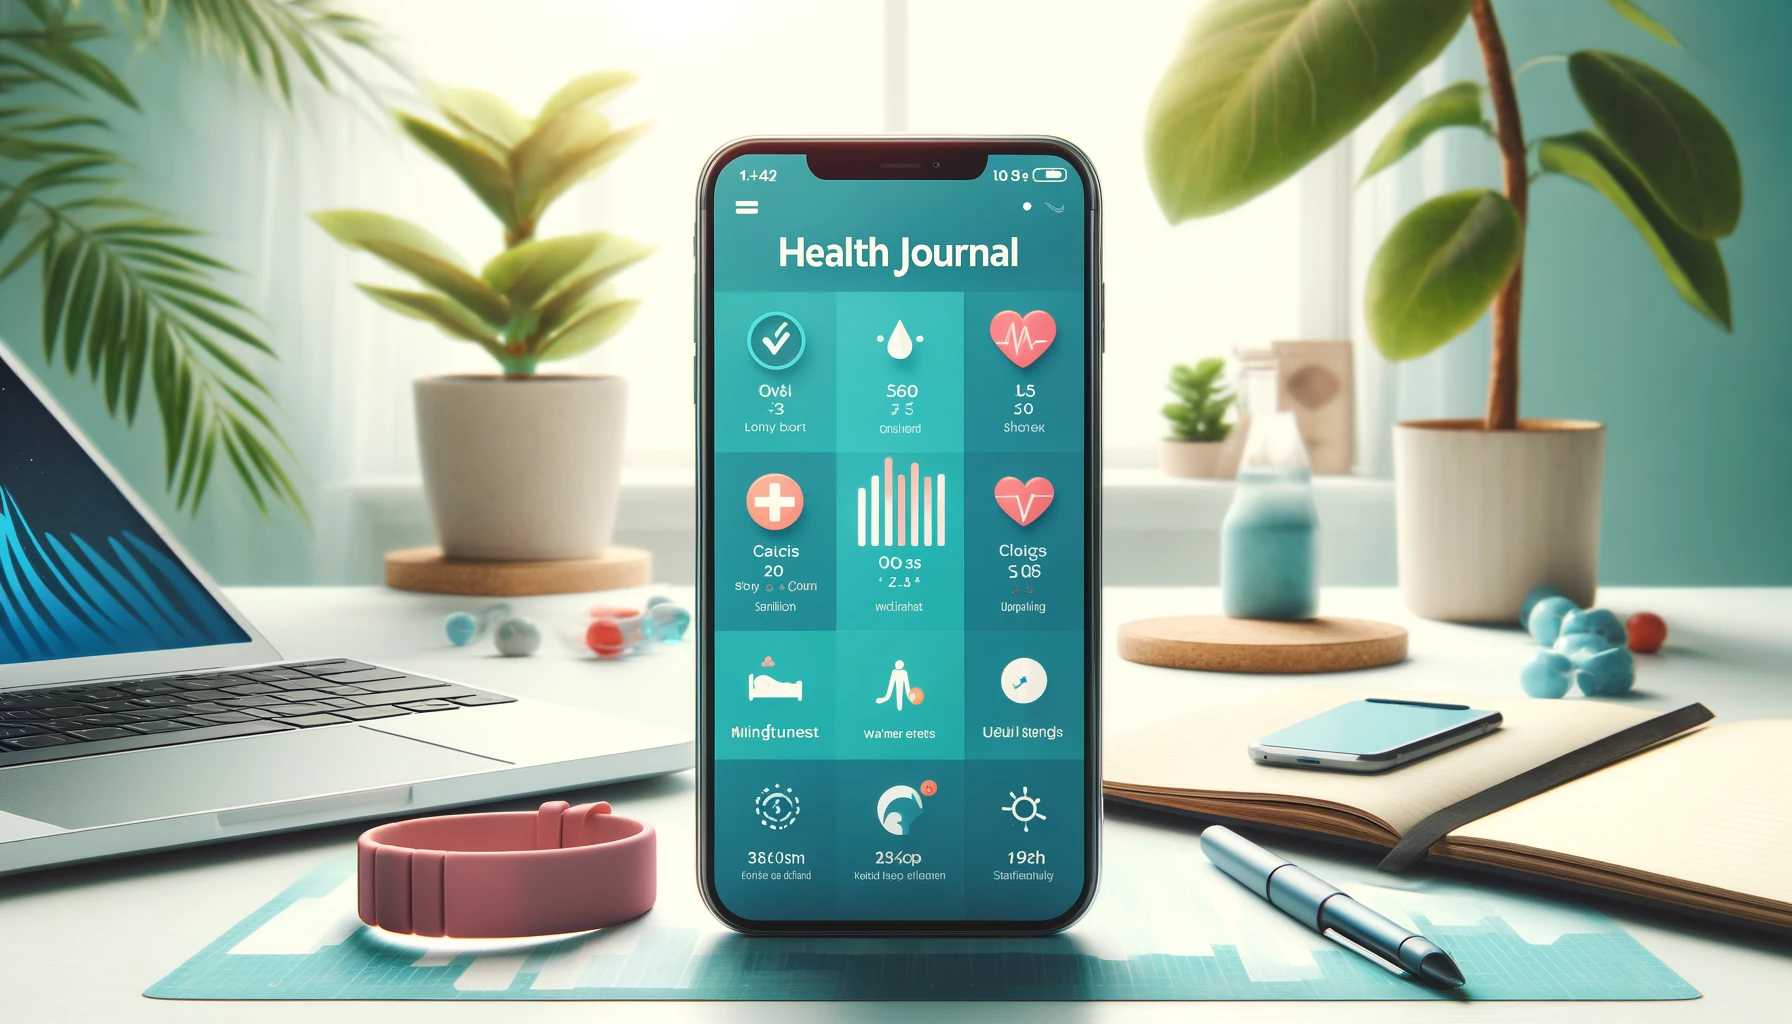 Top Health Journal App for Tracking Wellness